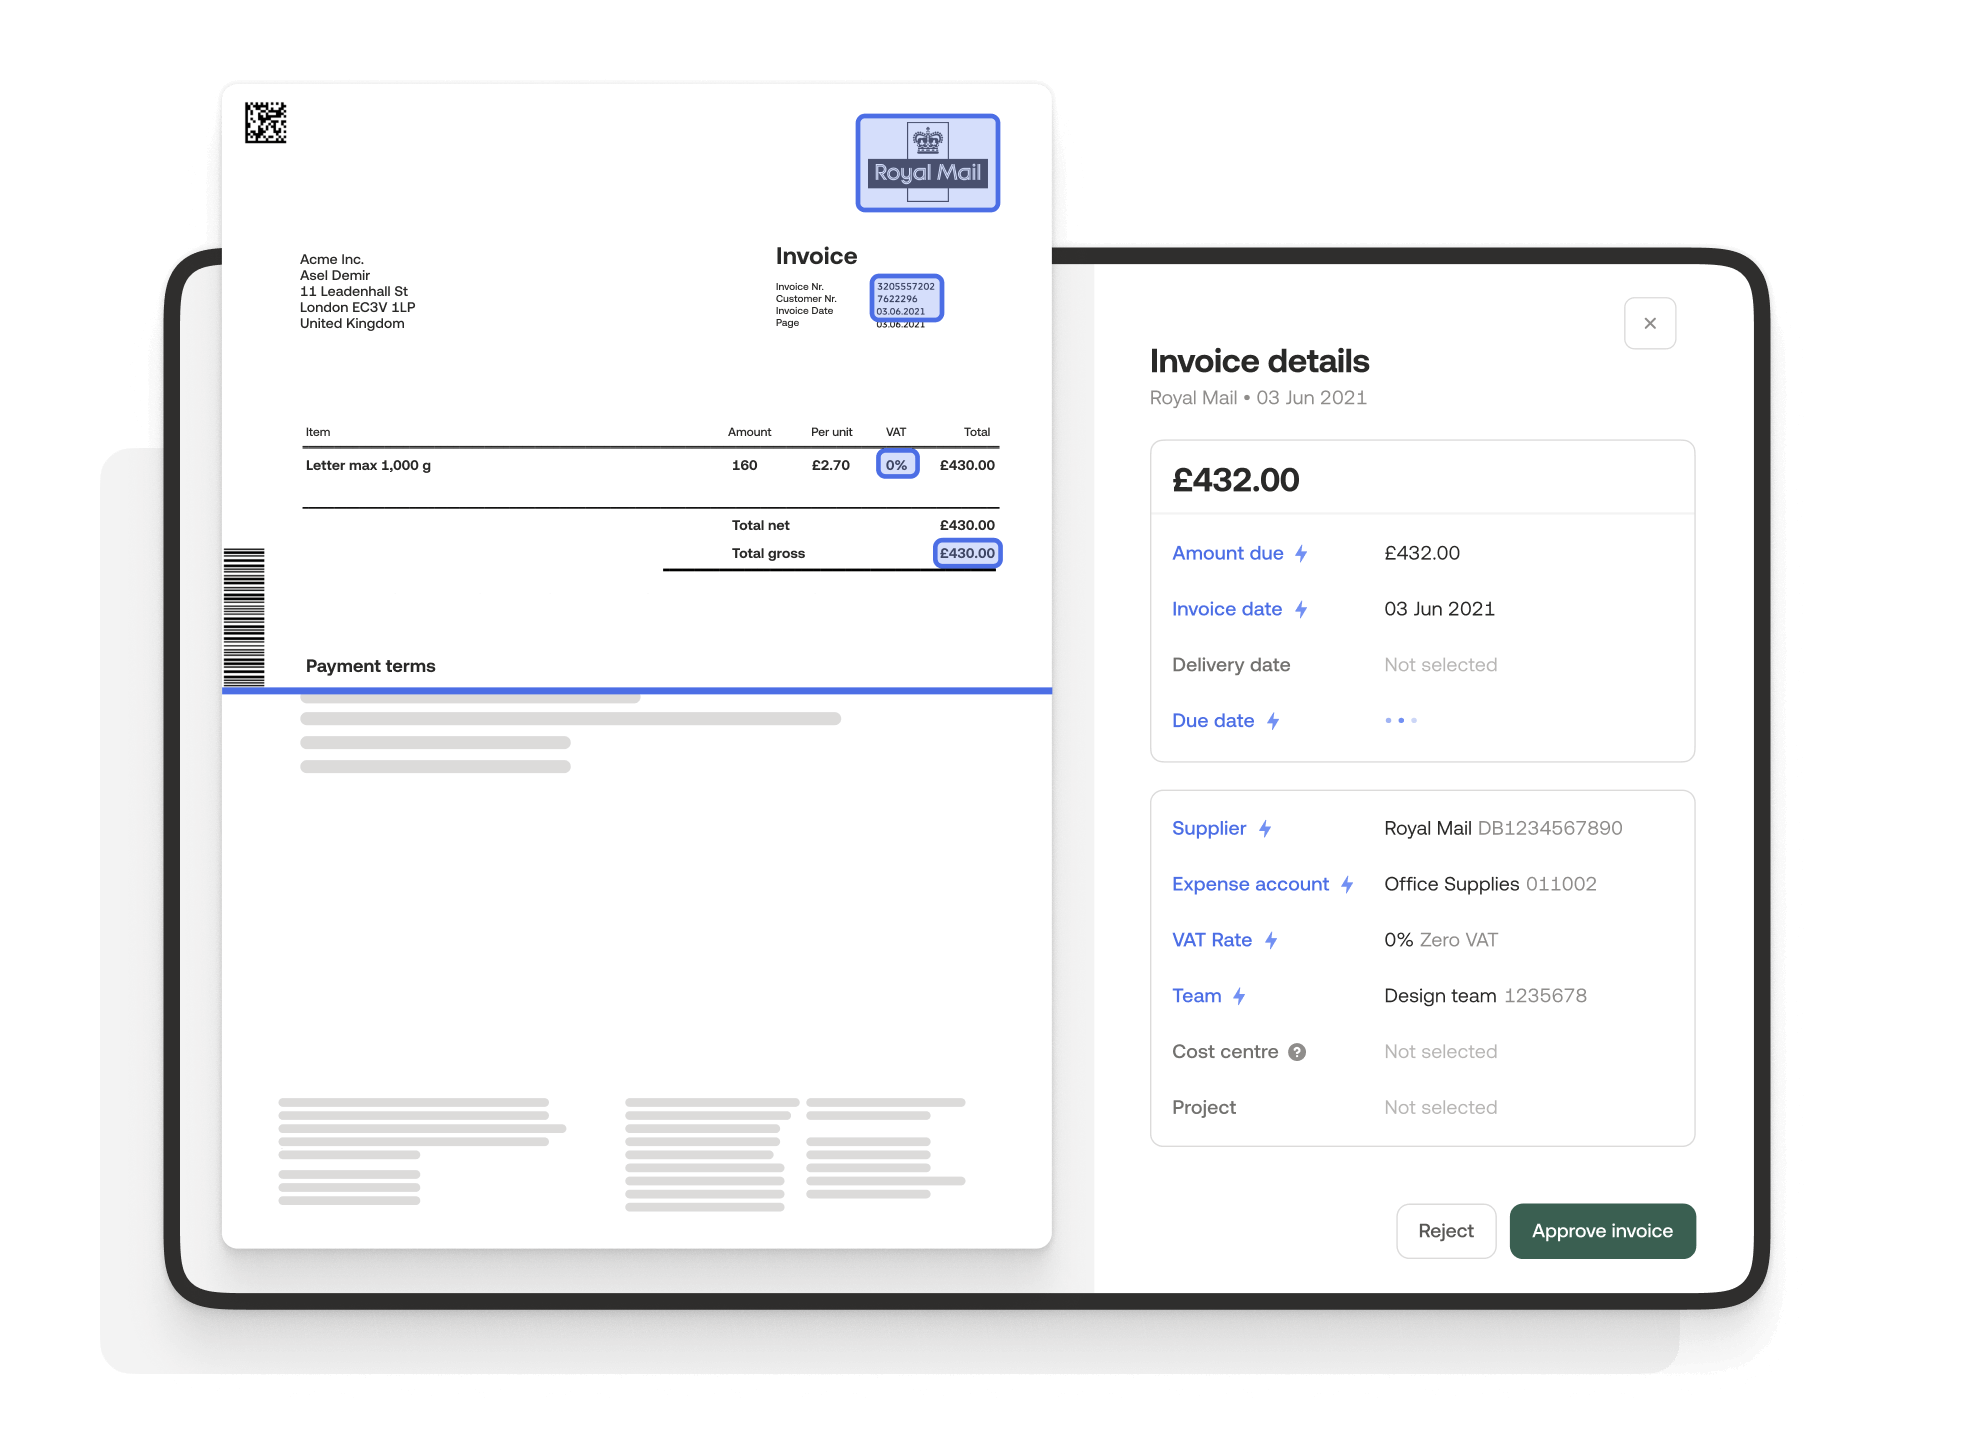 Invoice details in the Moss platform